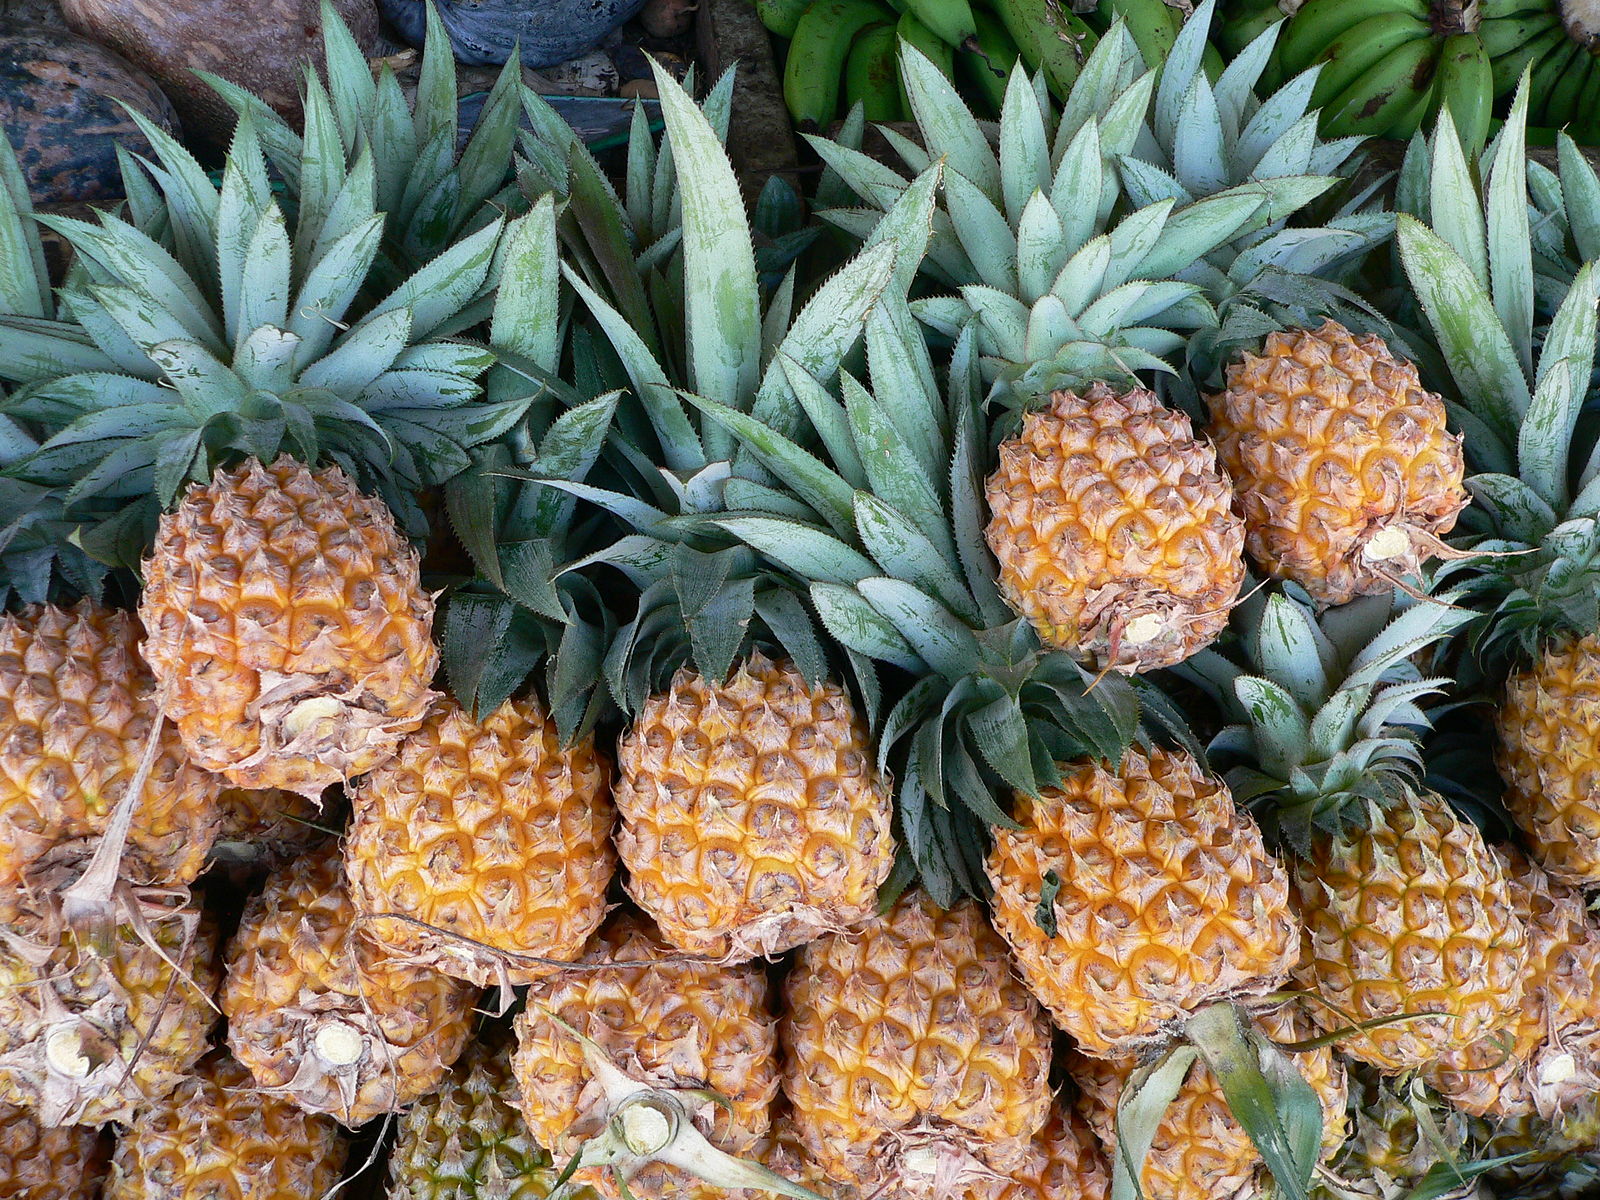 Difference between Ananas and Pineapple